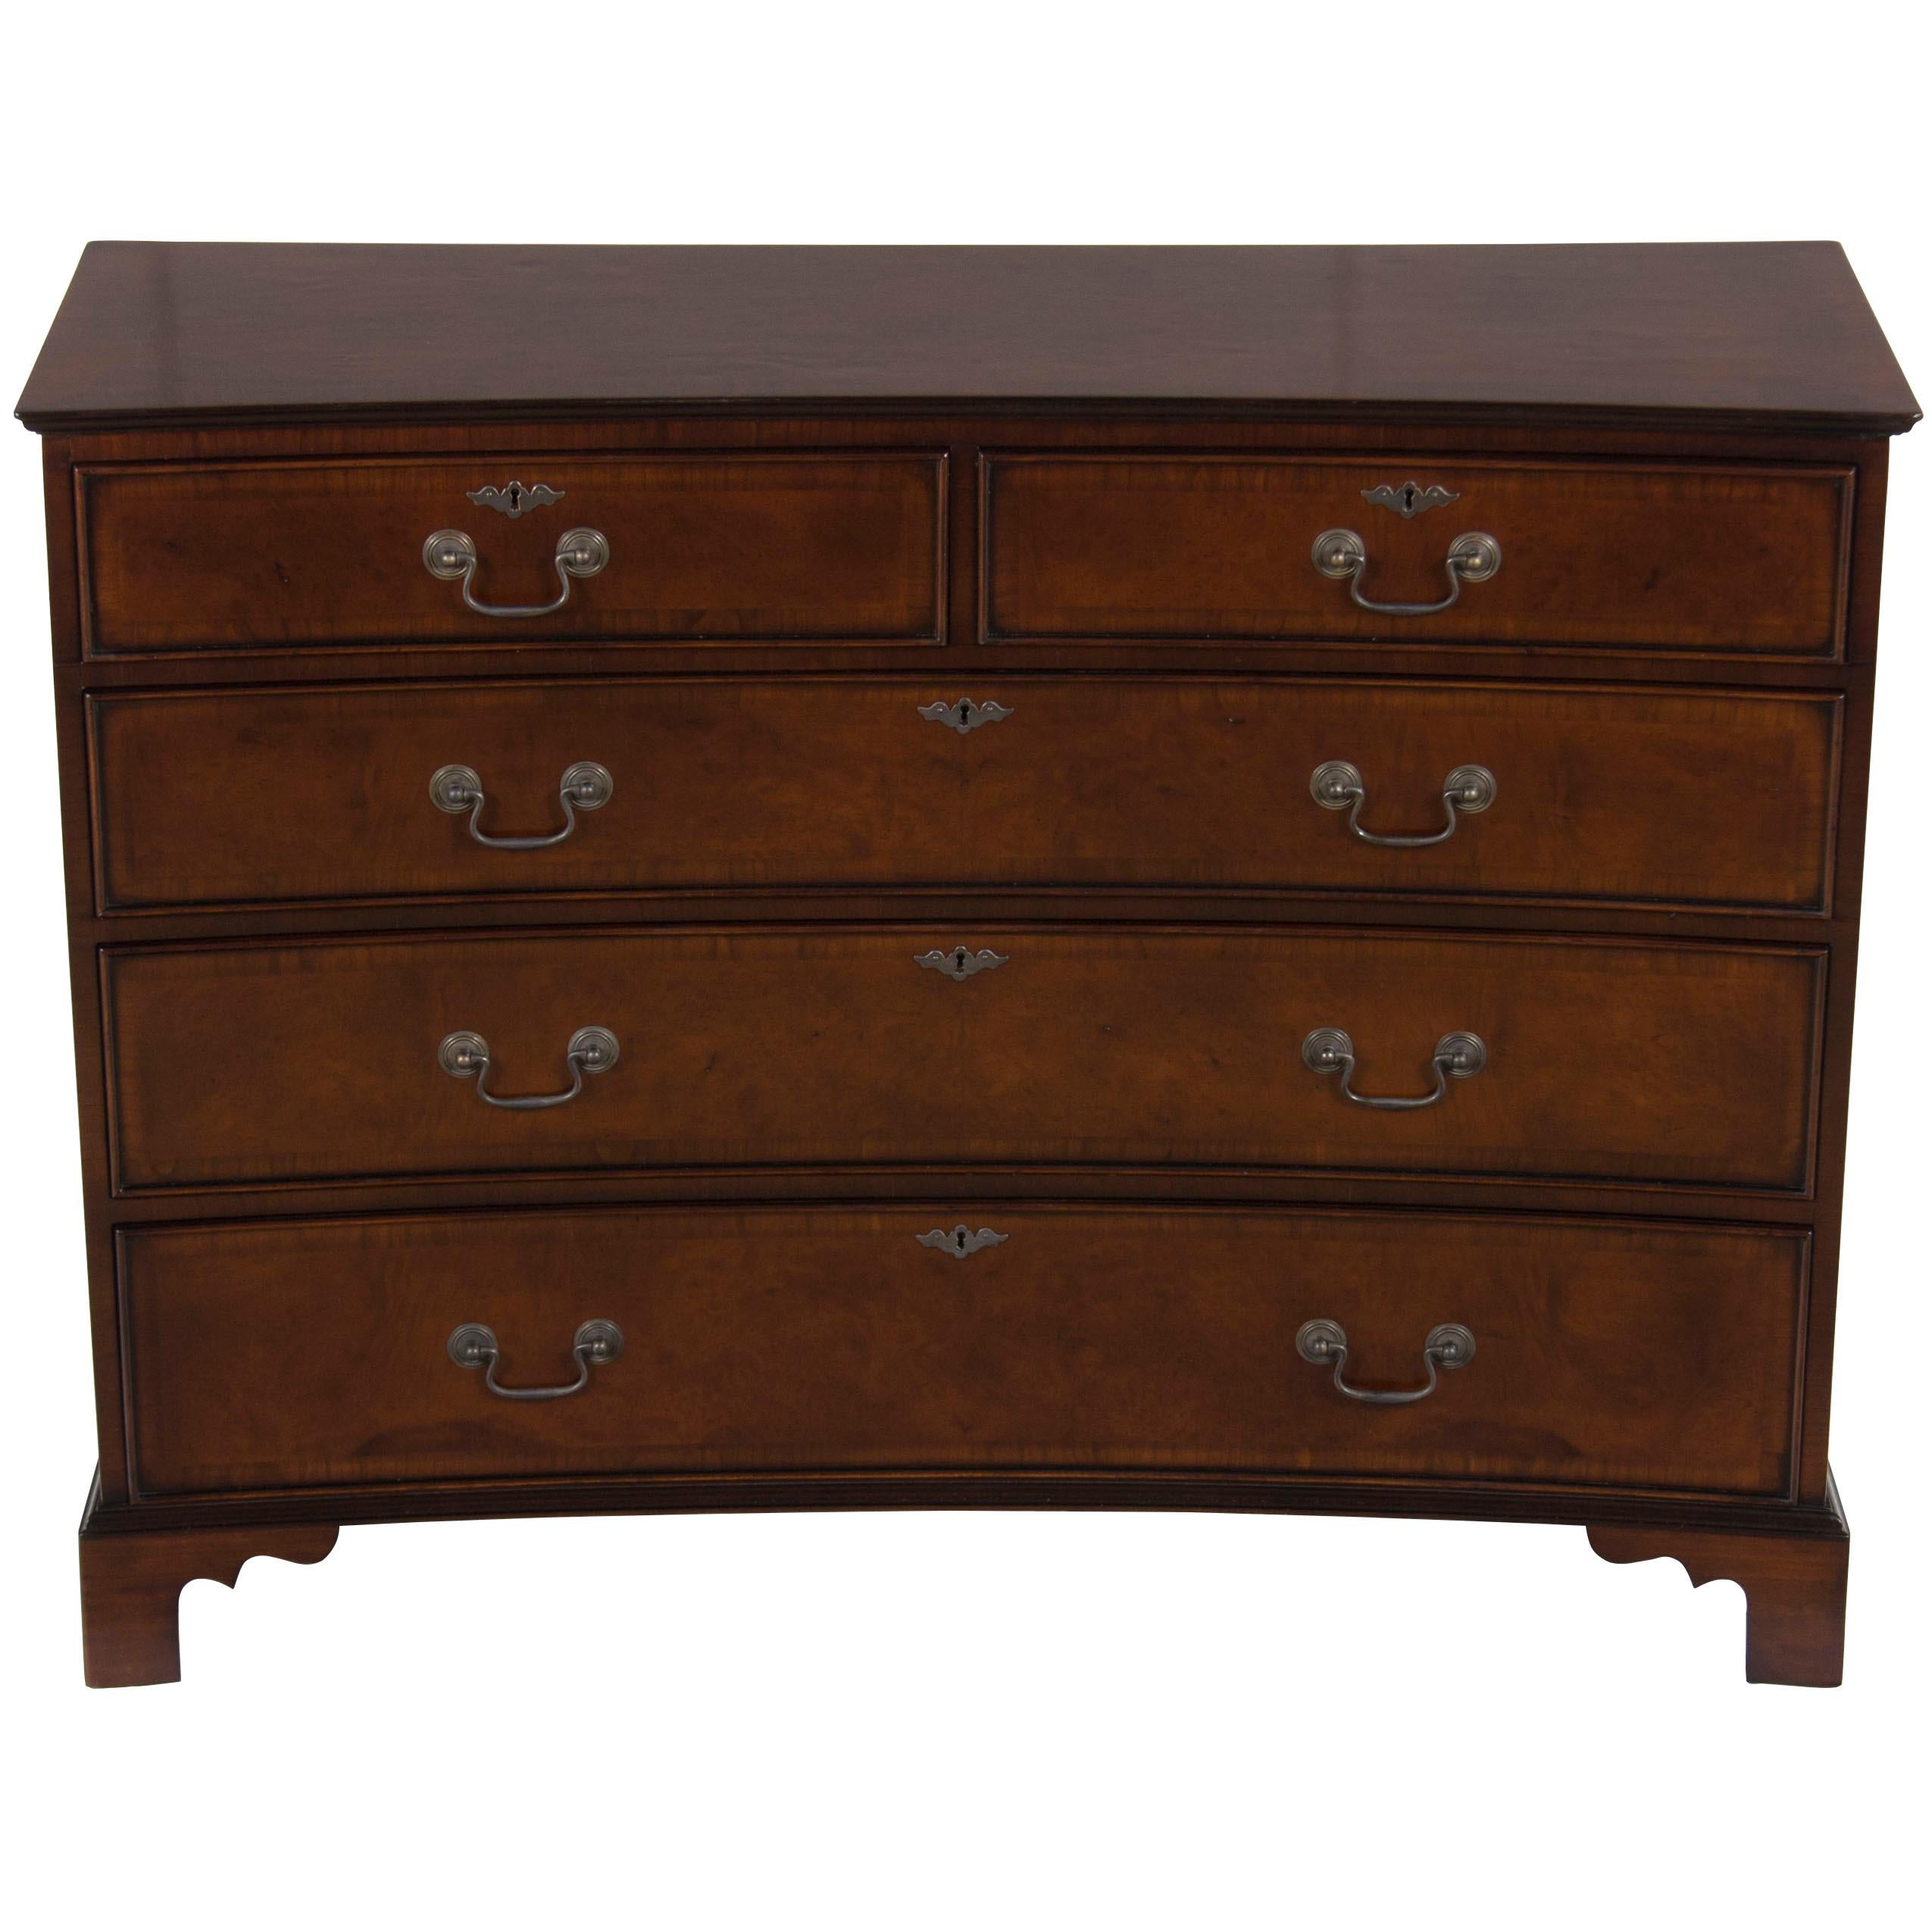 Inverted or Reverse Bow Front Narrow Chest of Drawers Dresser For Sale